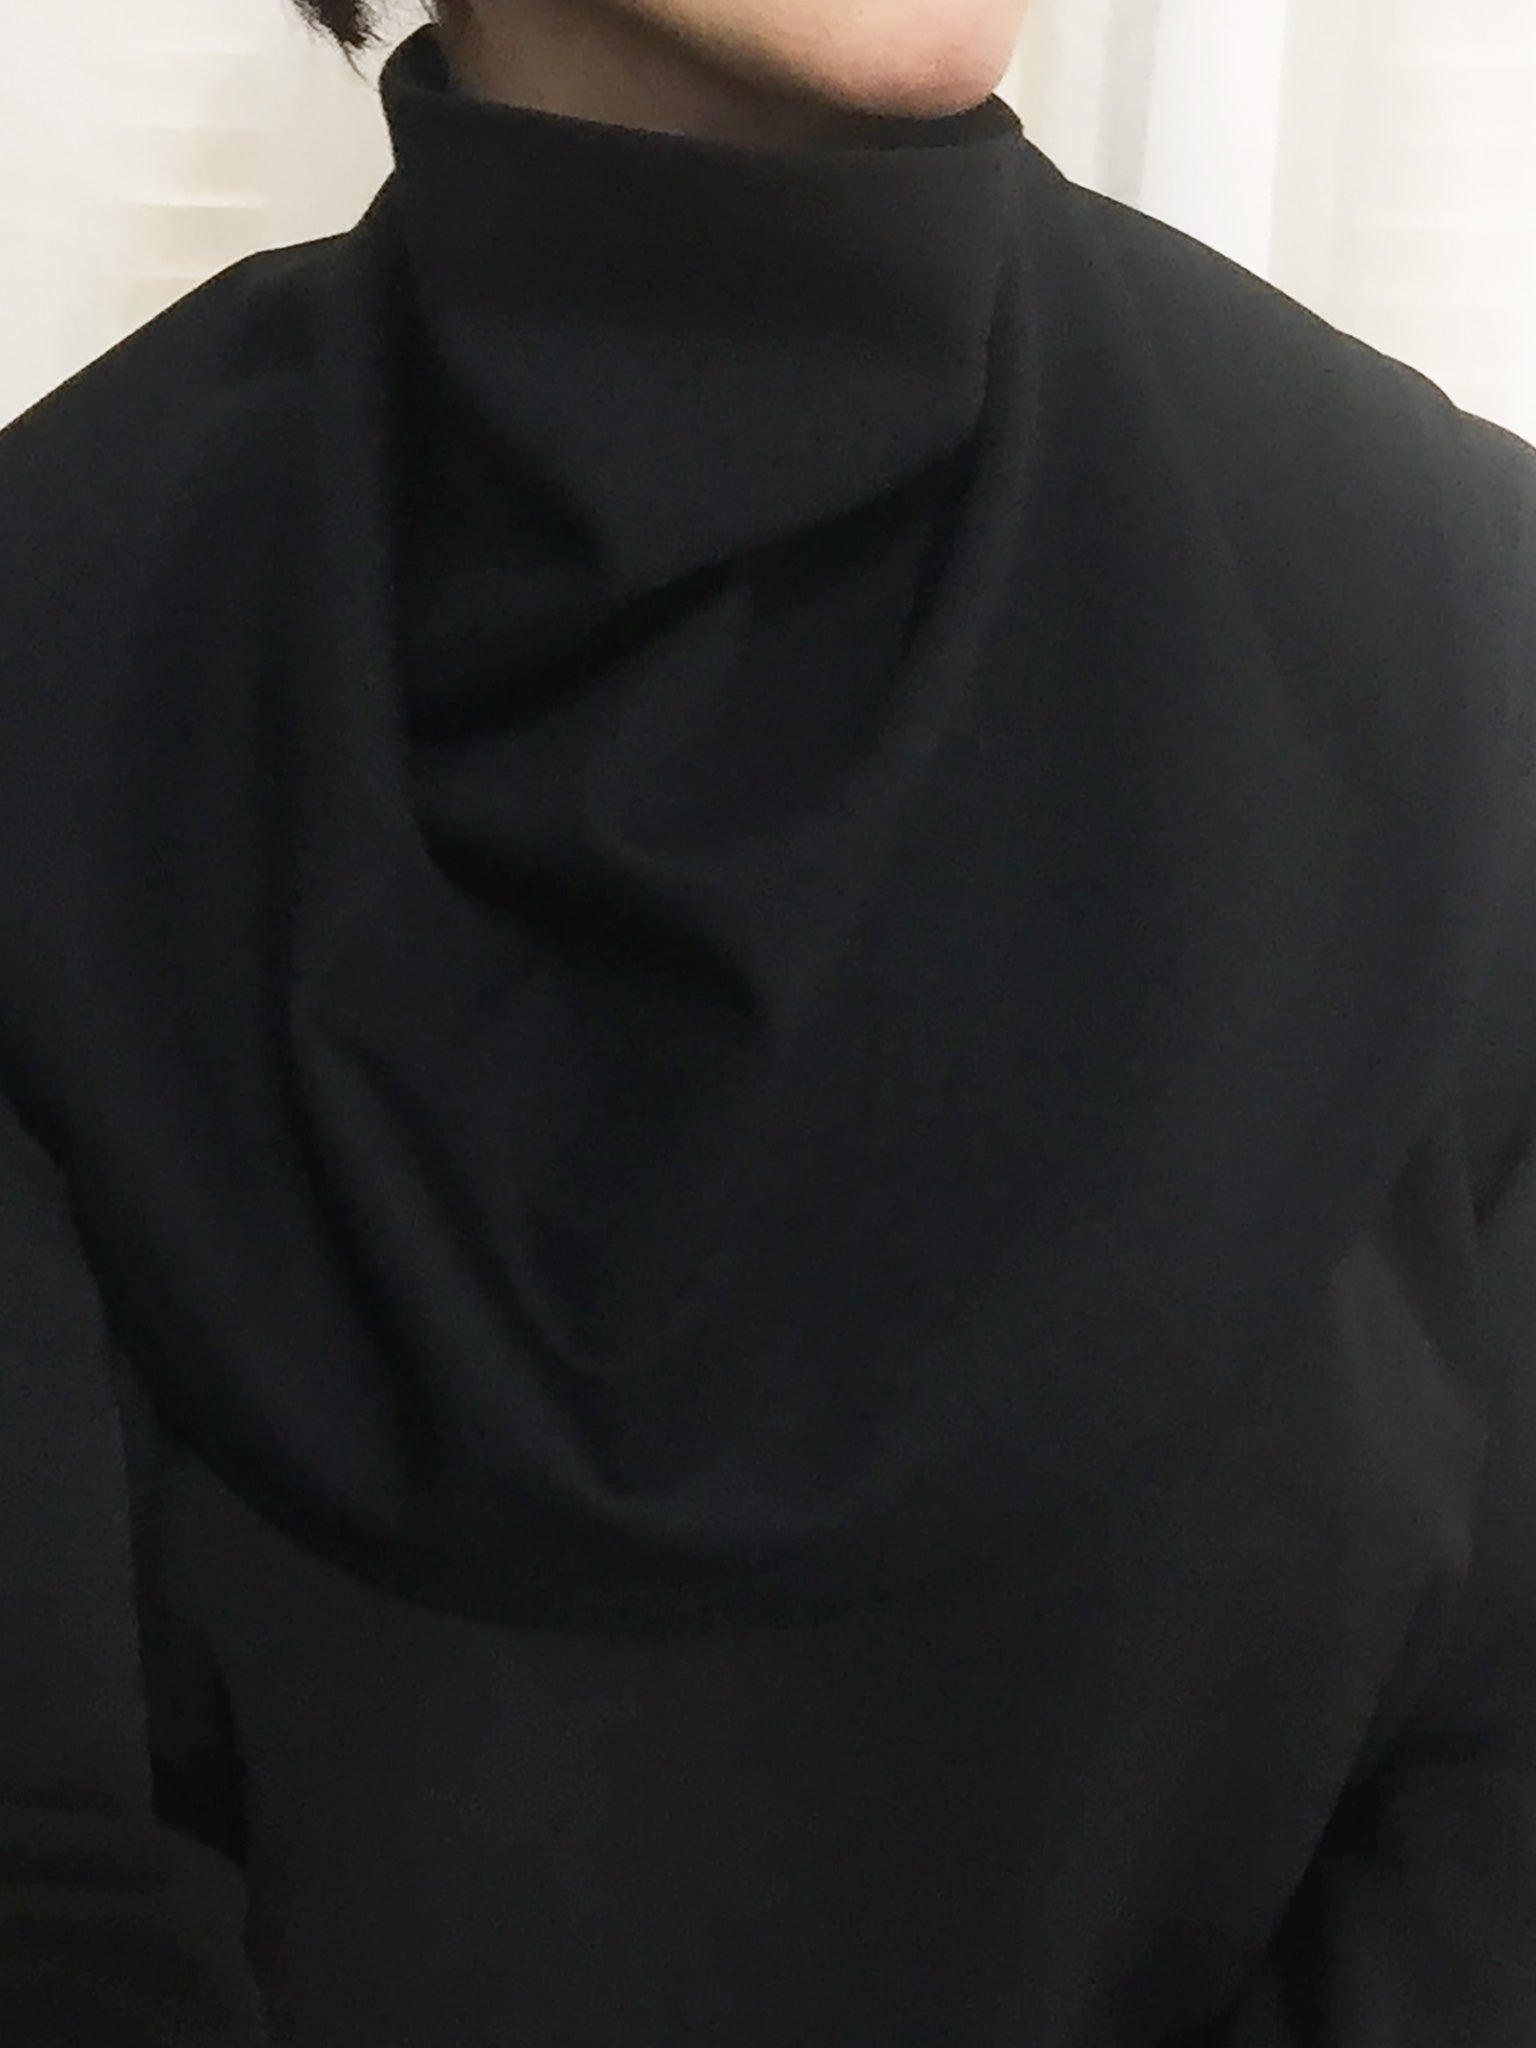 Black Scarf For Women And Men